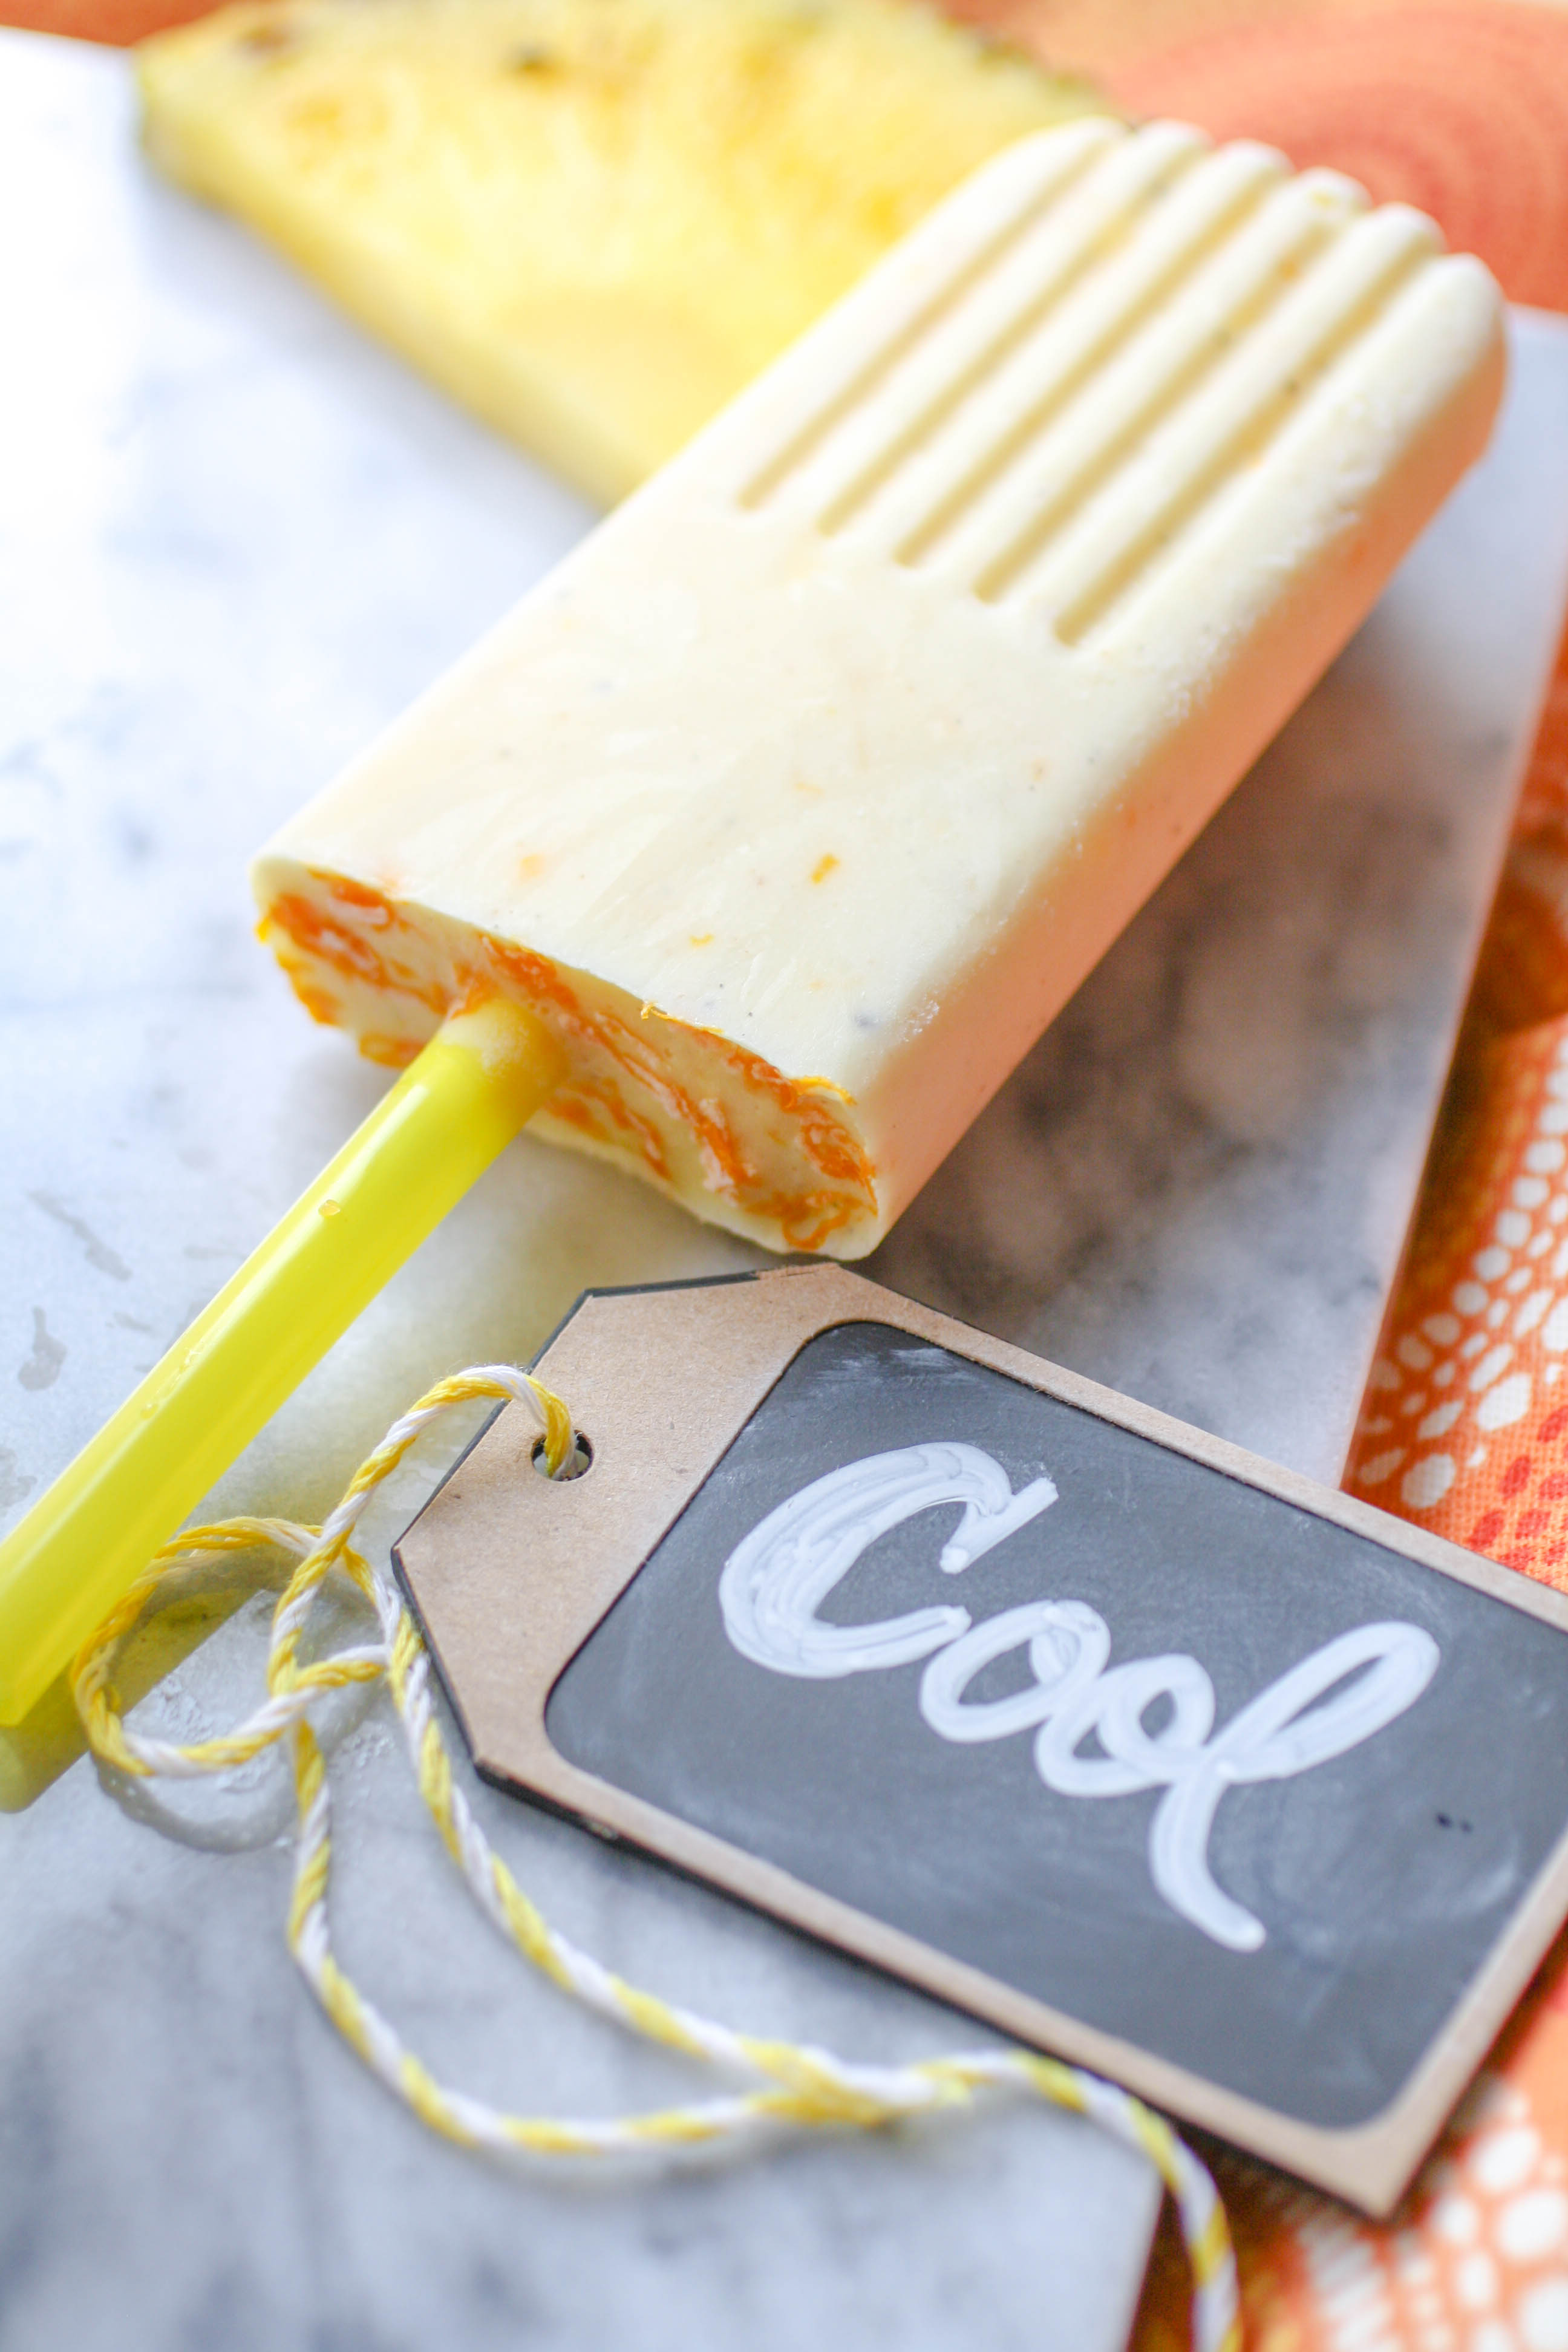 Pineapple-Orange & Cardamom Creamsicles are tasty frozen treats! Pineapple-Orange & Cardamom Creamsicles are delicious when it's hot out (and even when it's not)! Pineapple-Orange & Cardamom Creamsicles make a great summertime treat!